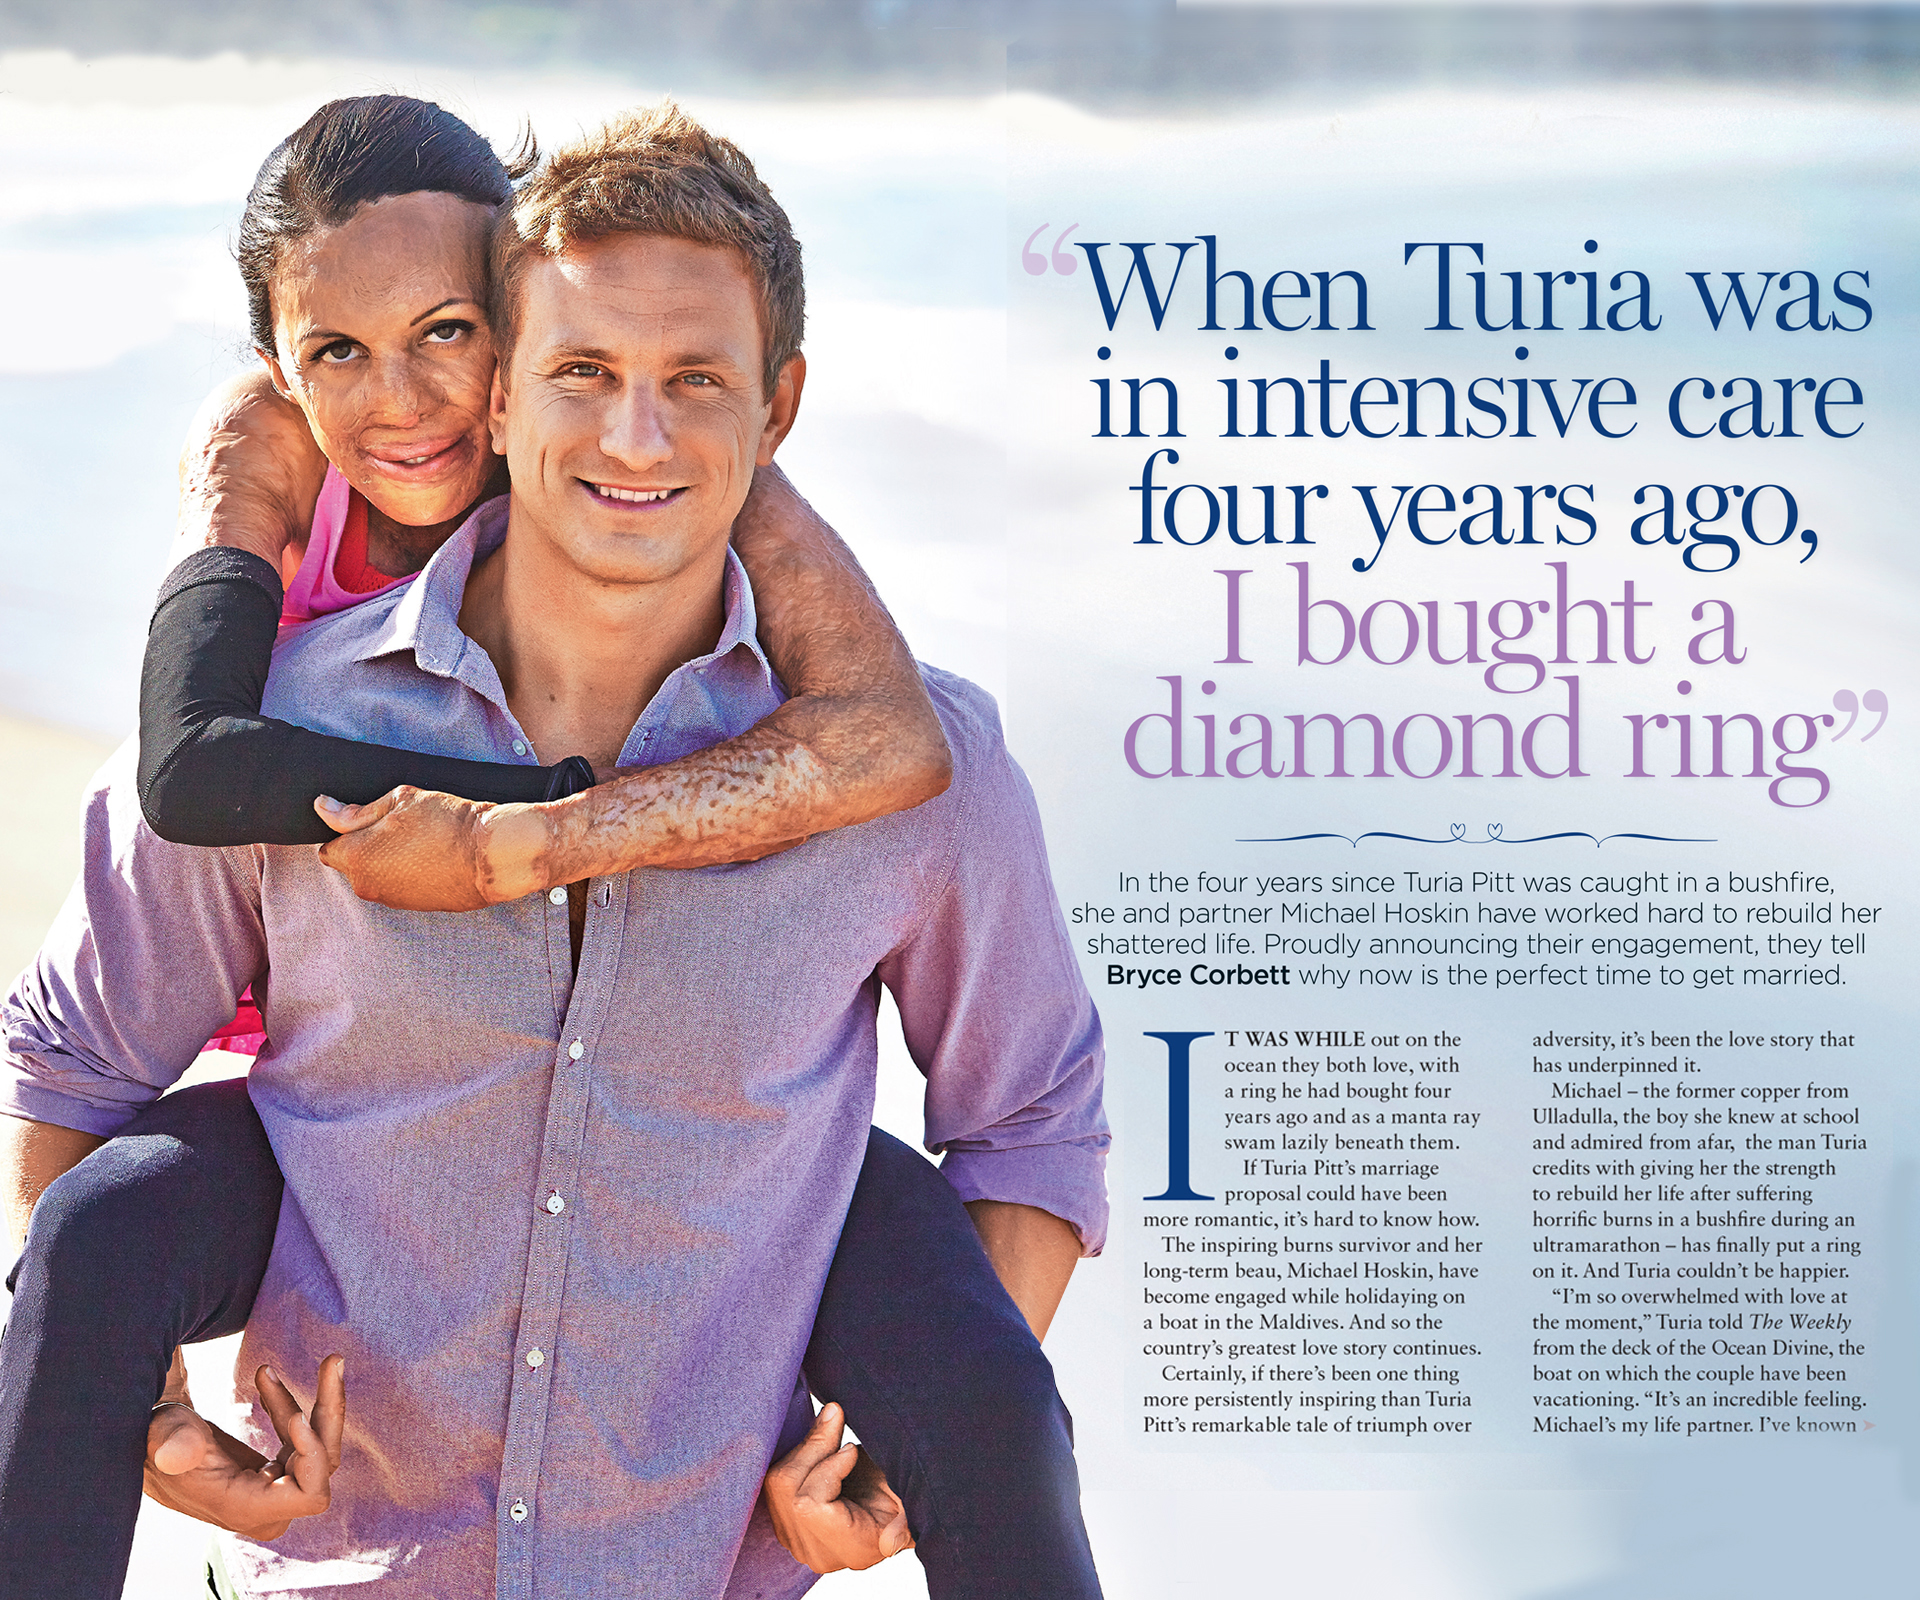 Turia Pitt and fiancé Michael Hoskin: Their EXCLUSIVE engagement story